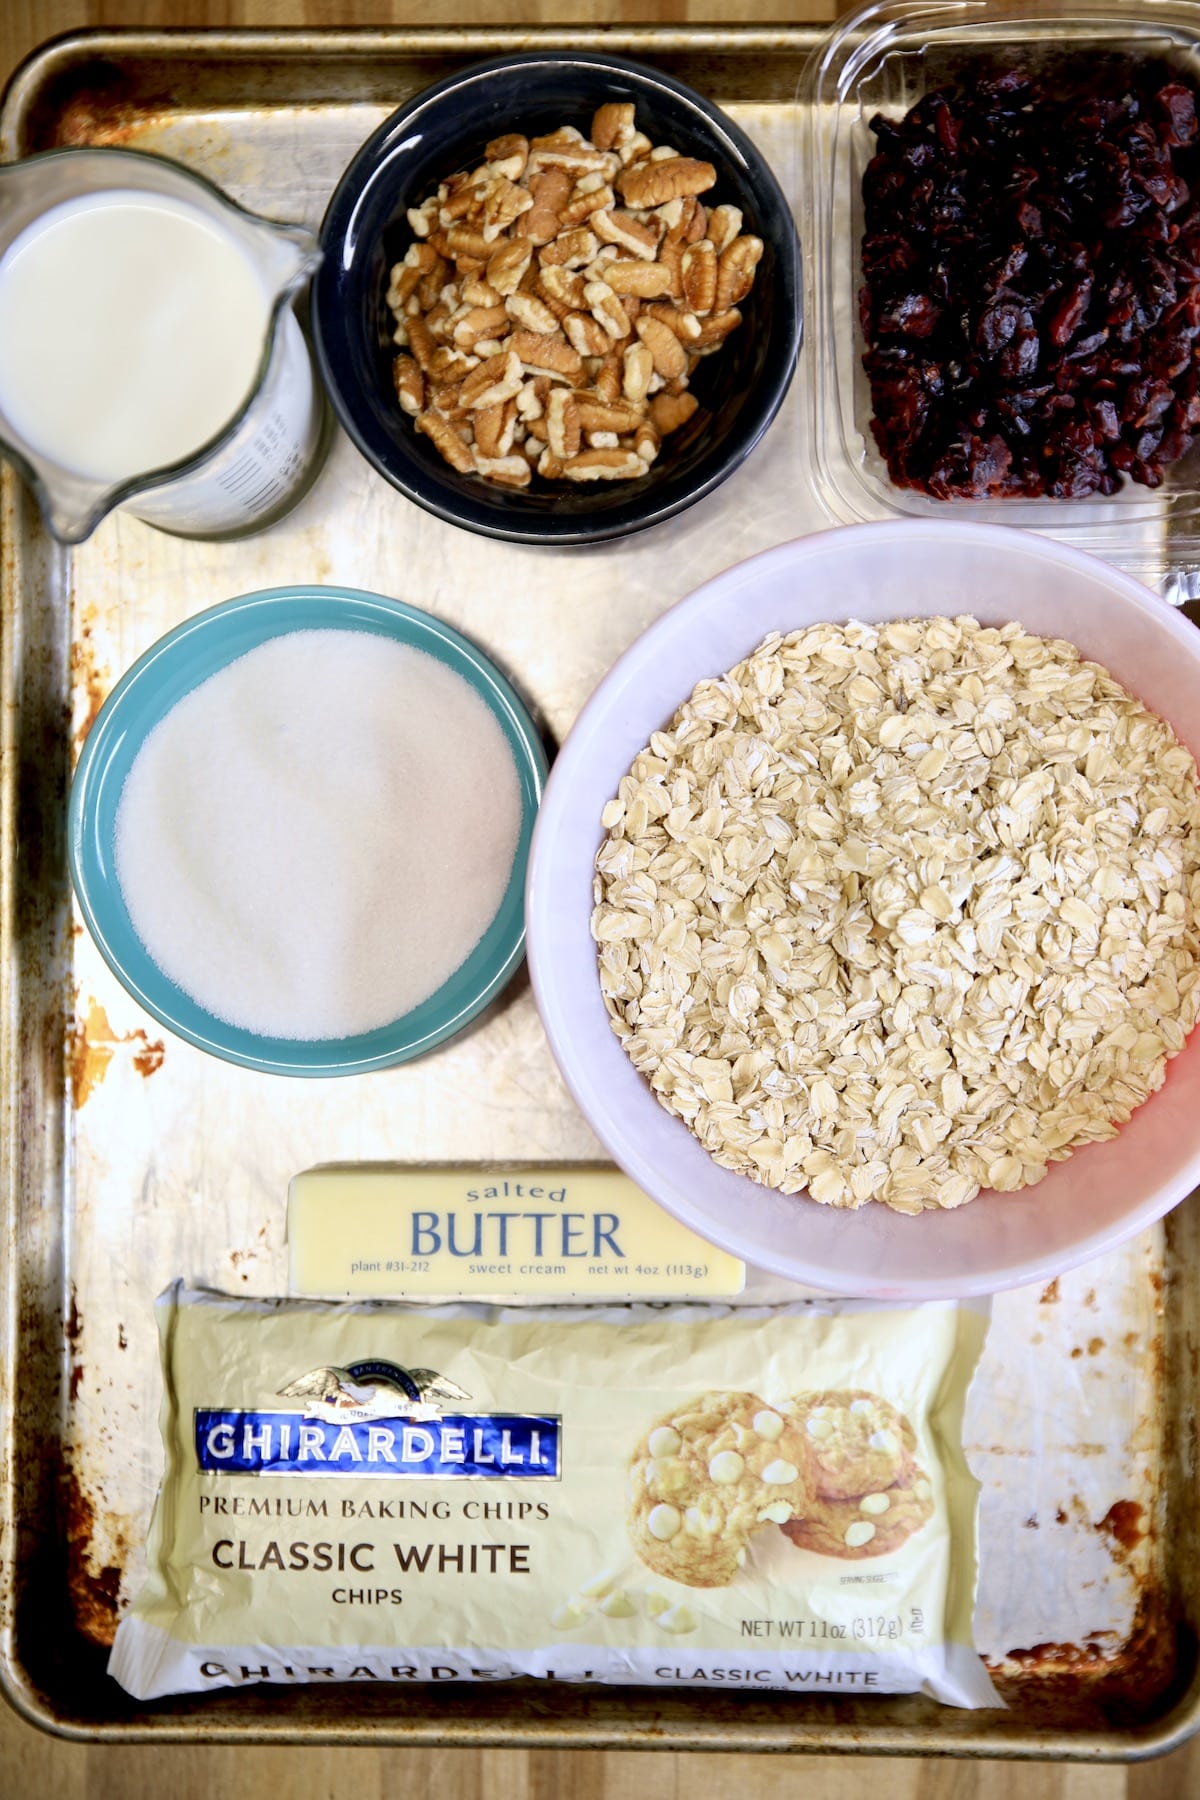 Ingredients for white chocolate cranberry cookies.